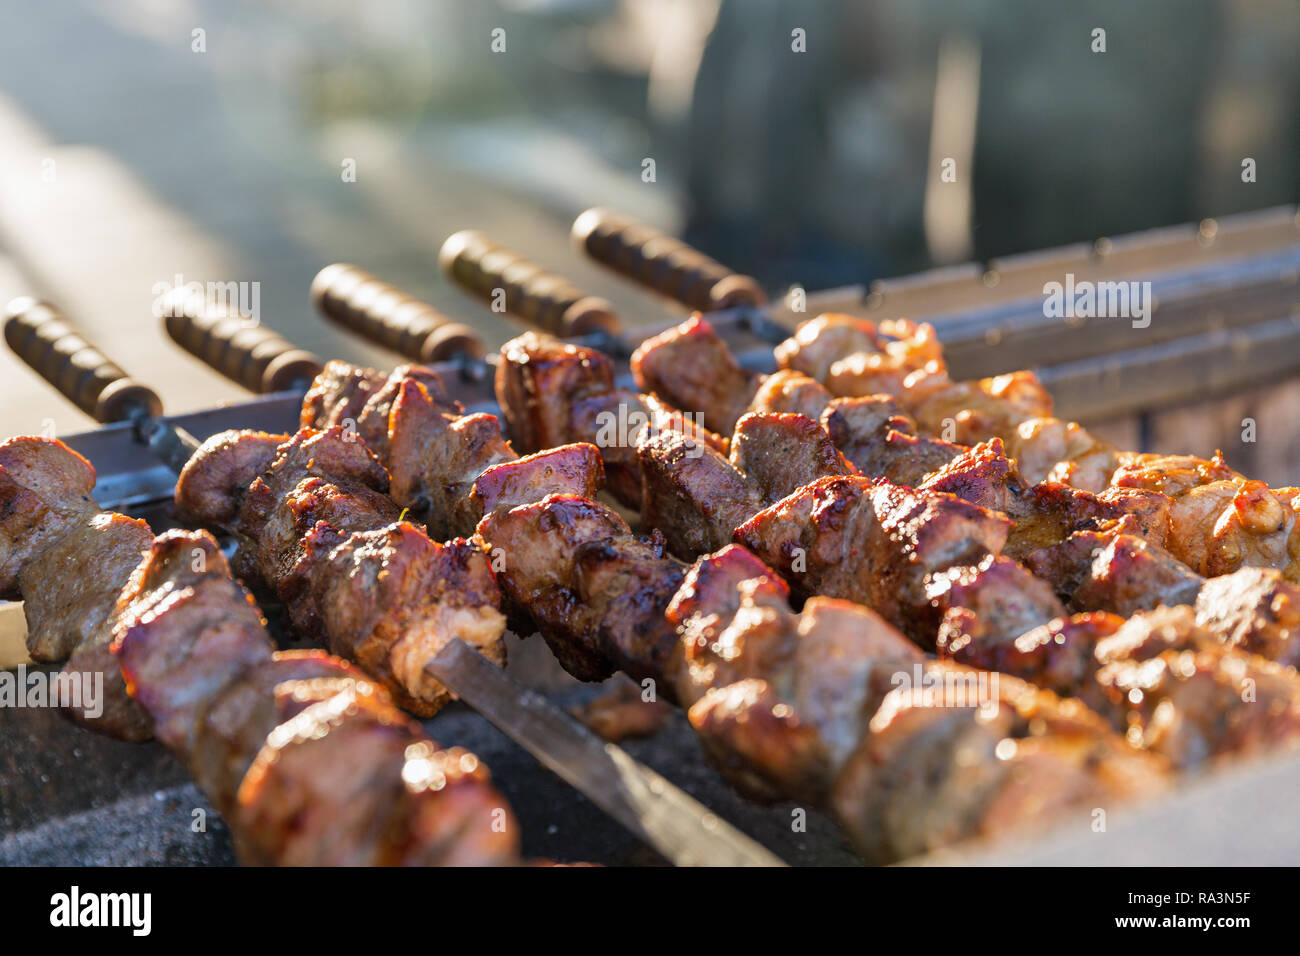 Barbecue on the grill closeup. Shashlik made of cubes of meat on the skewers during of cooking on the mangal over charcoal outdoors. Stock Photo